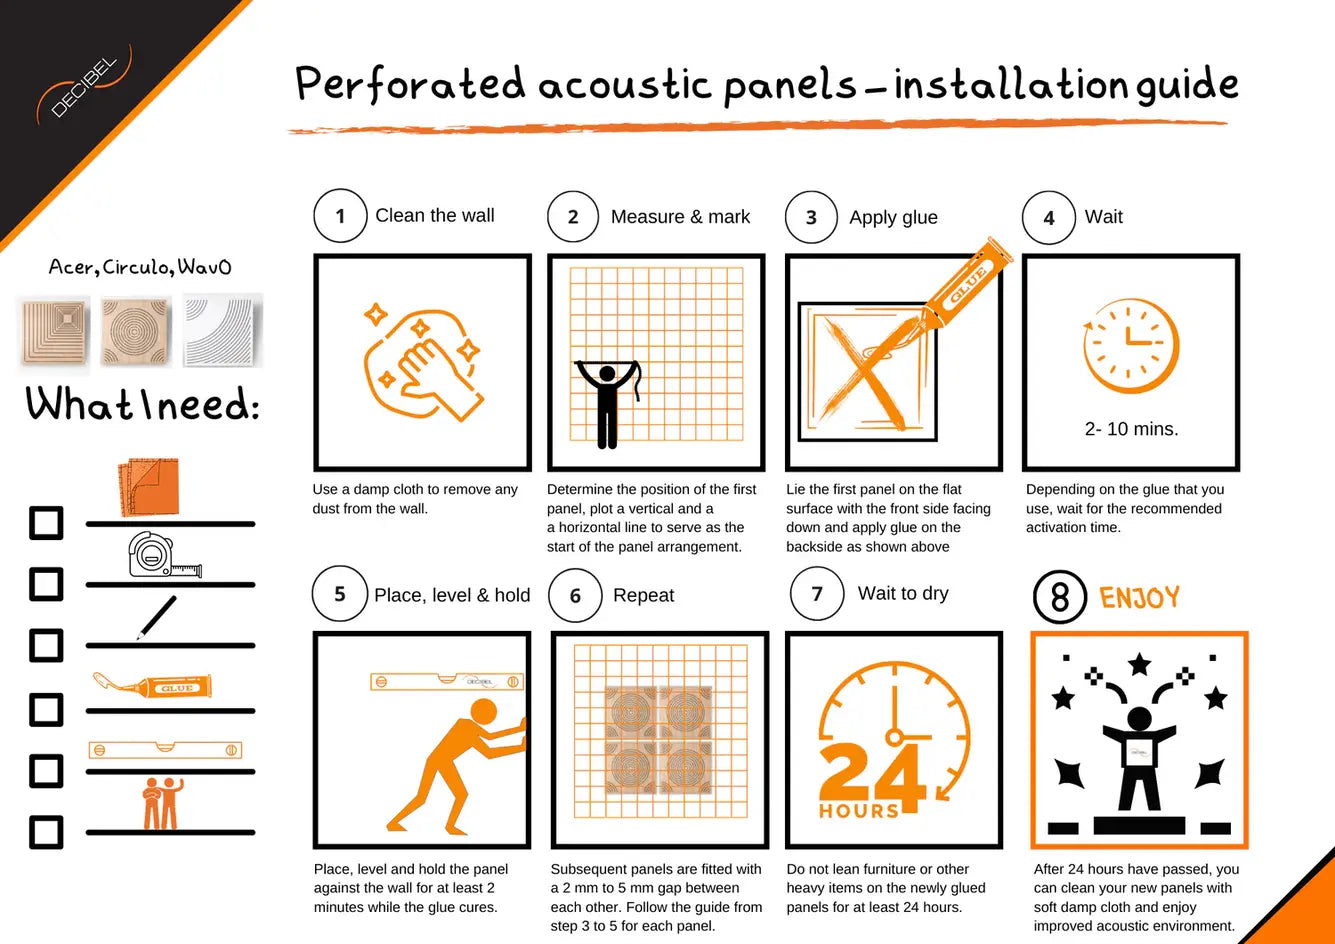 Wood Acoustic Sound Absorbing Panel Installation Guide